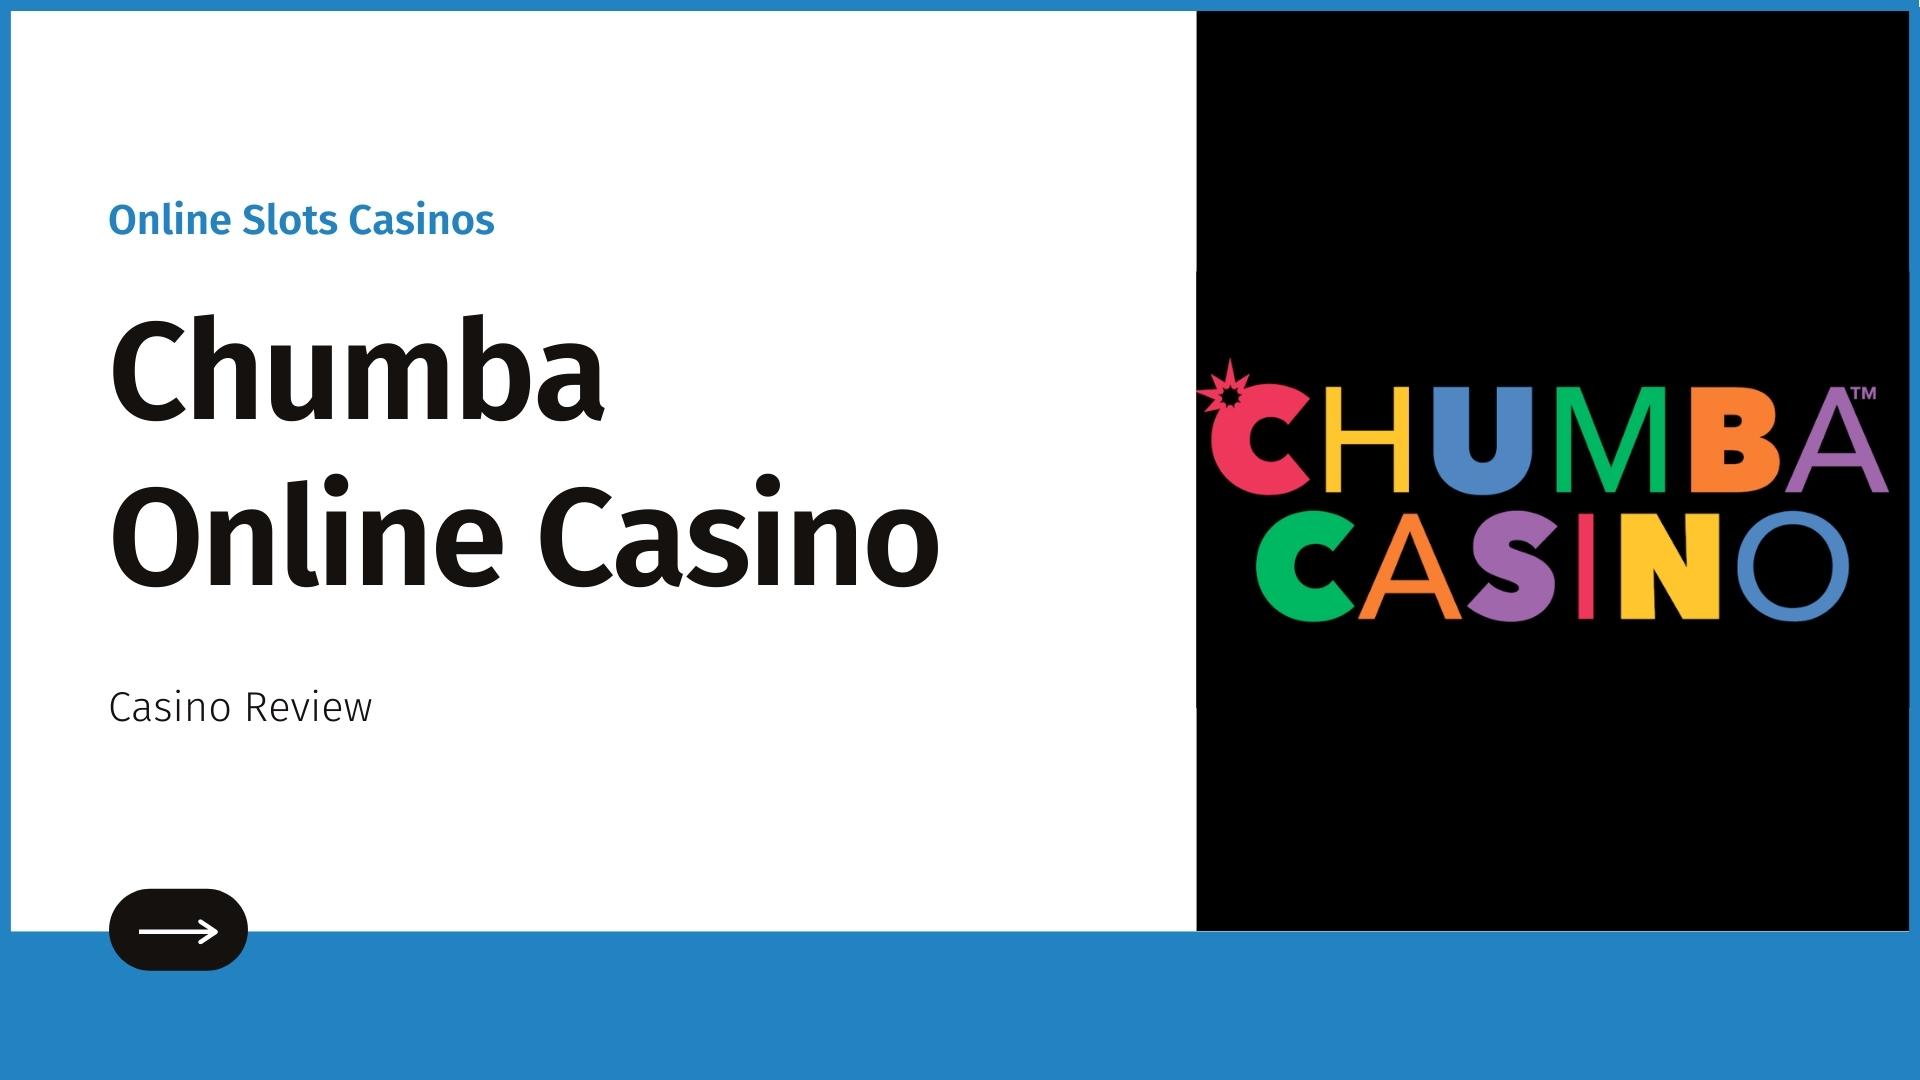 Let's get acquainted with Chumba casino